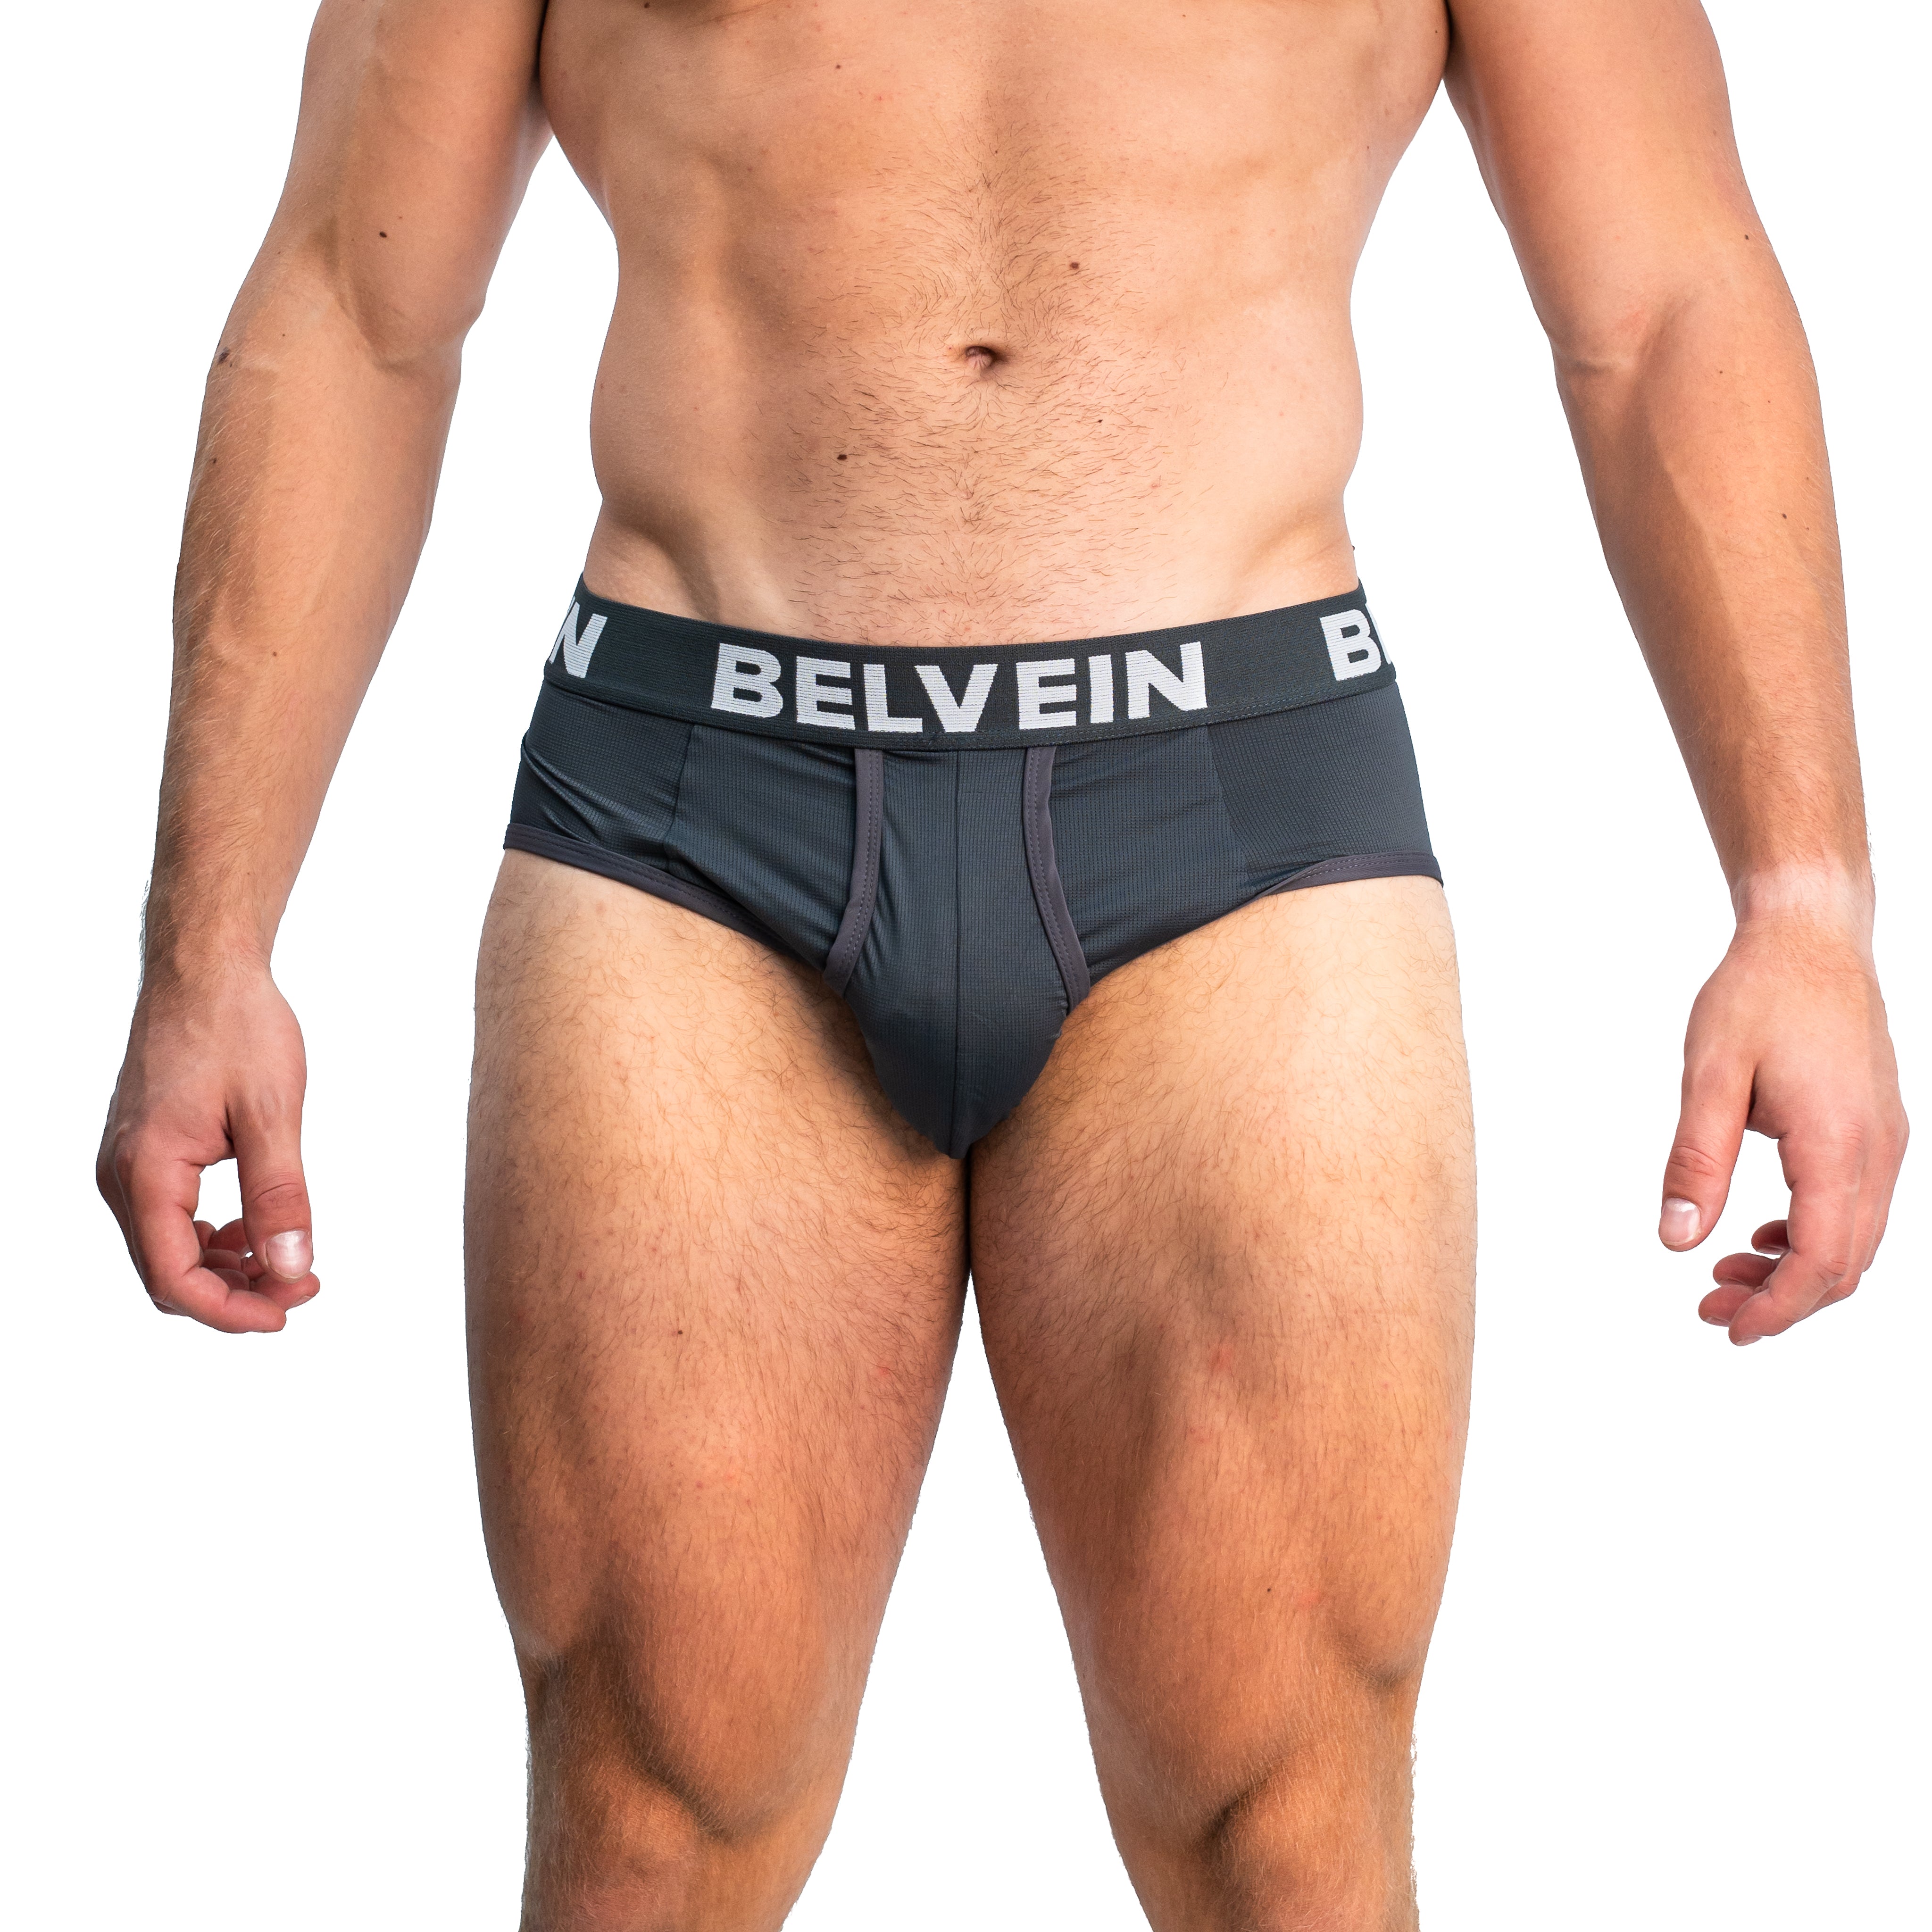 A7 Meet Day Undies perfect for your IPF Approved Kit. A7 Belvein briefs are stretchy and supportive underwear for the gym and lifting. A7 Briefs for your meet day powerlifting competitions. A7 belvein briefs are a great underwear for powerlifters. Purchase A7 belvein briefs from A7 Europe. Purchase A7 belvein briefs from A7 UK. Available in UK and Europe including France, Italy, Germany, the Netherlands, Sweden and Poland.